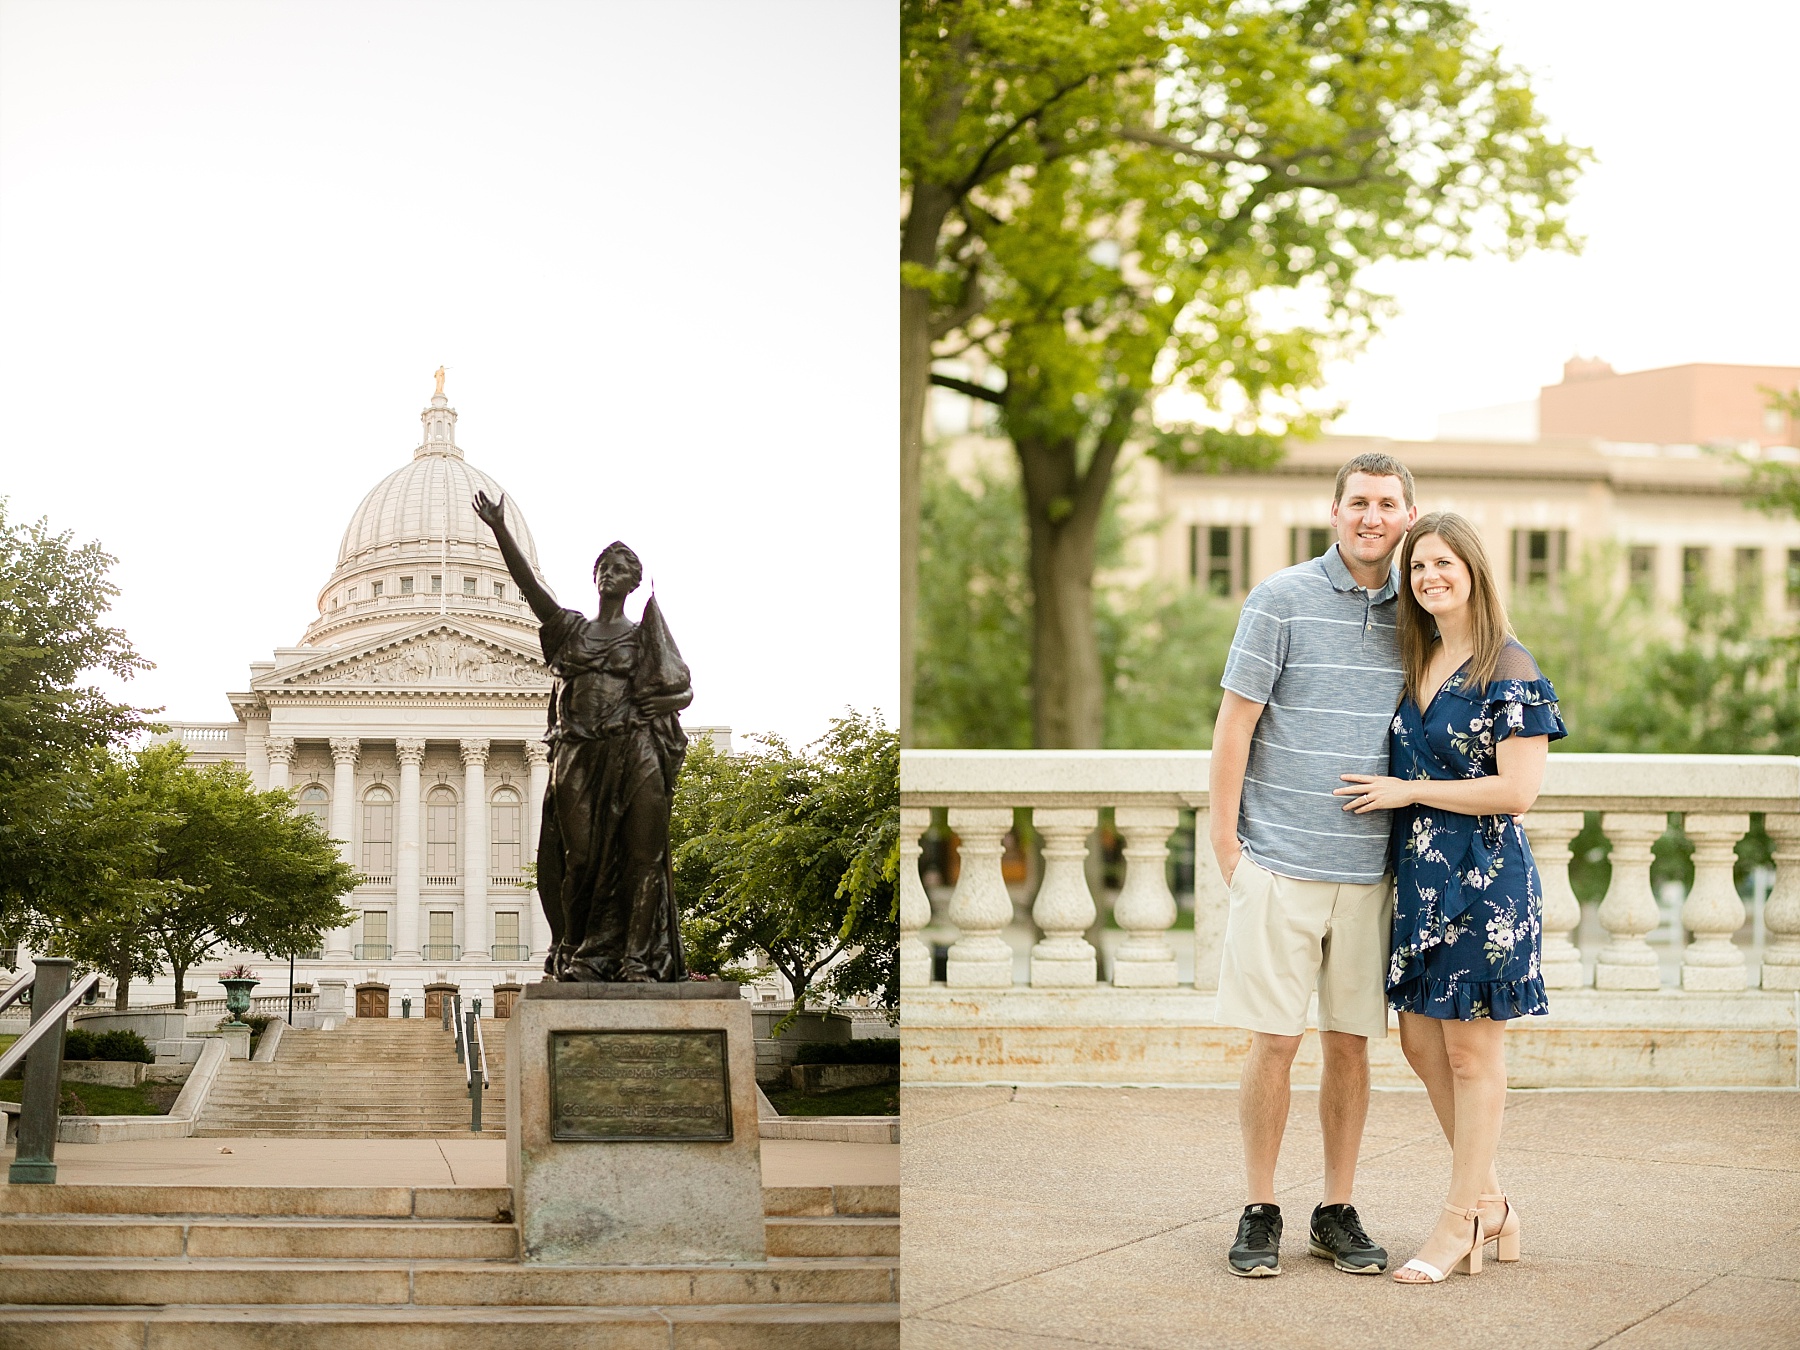 In the spot where he proposed, we photographed their engagement photos for a state capitol engagement session in Madison, WI